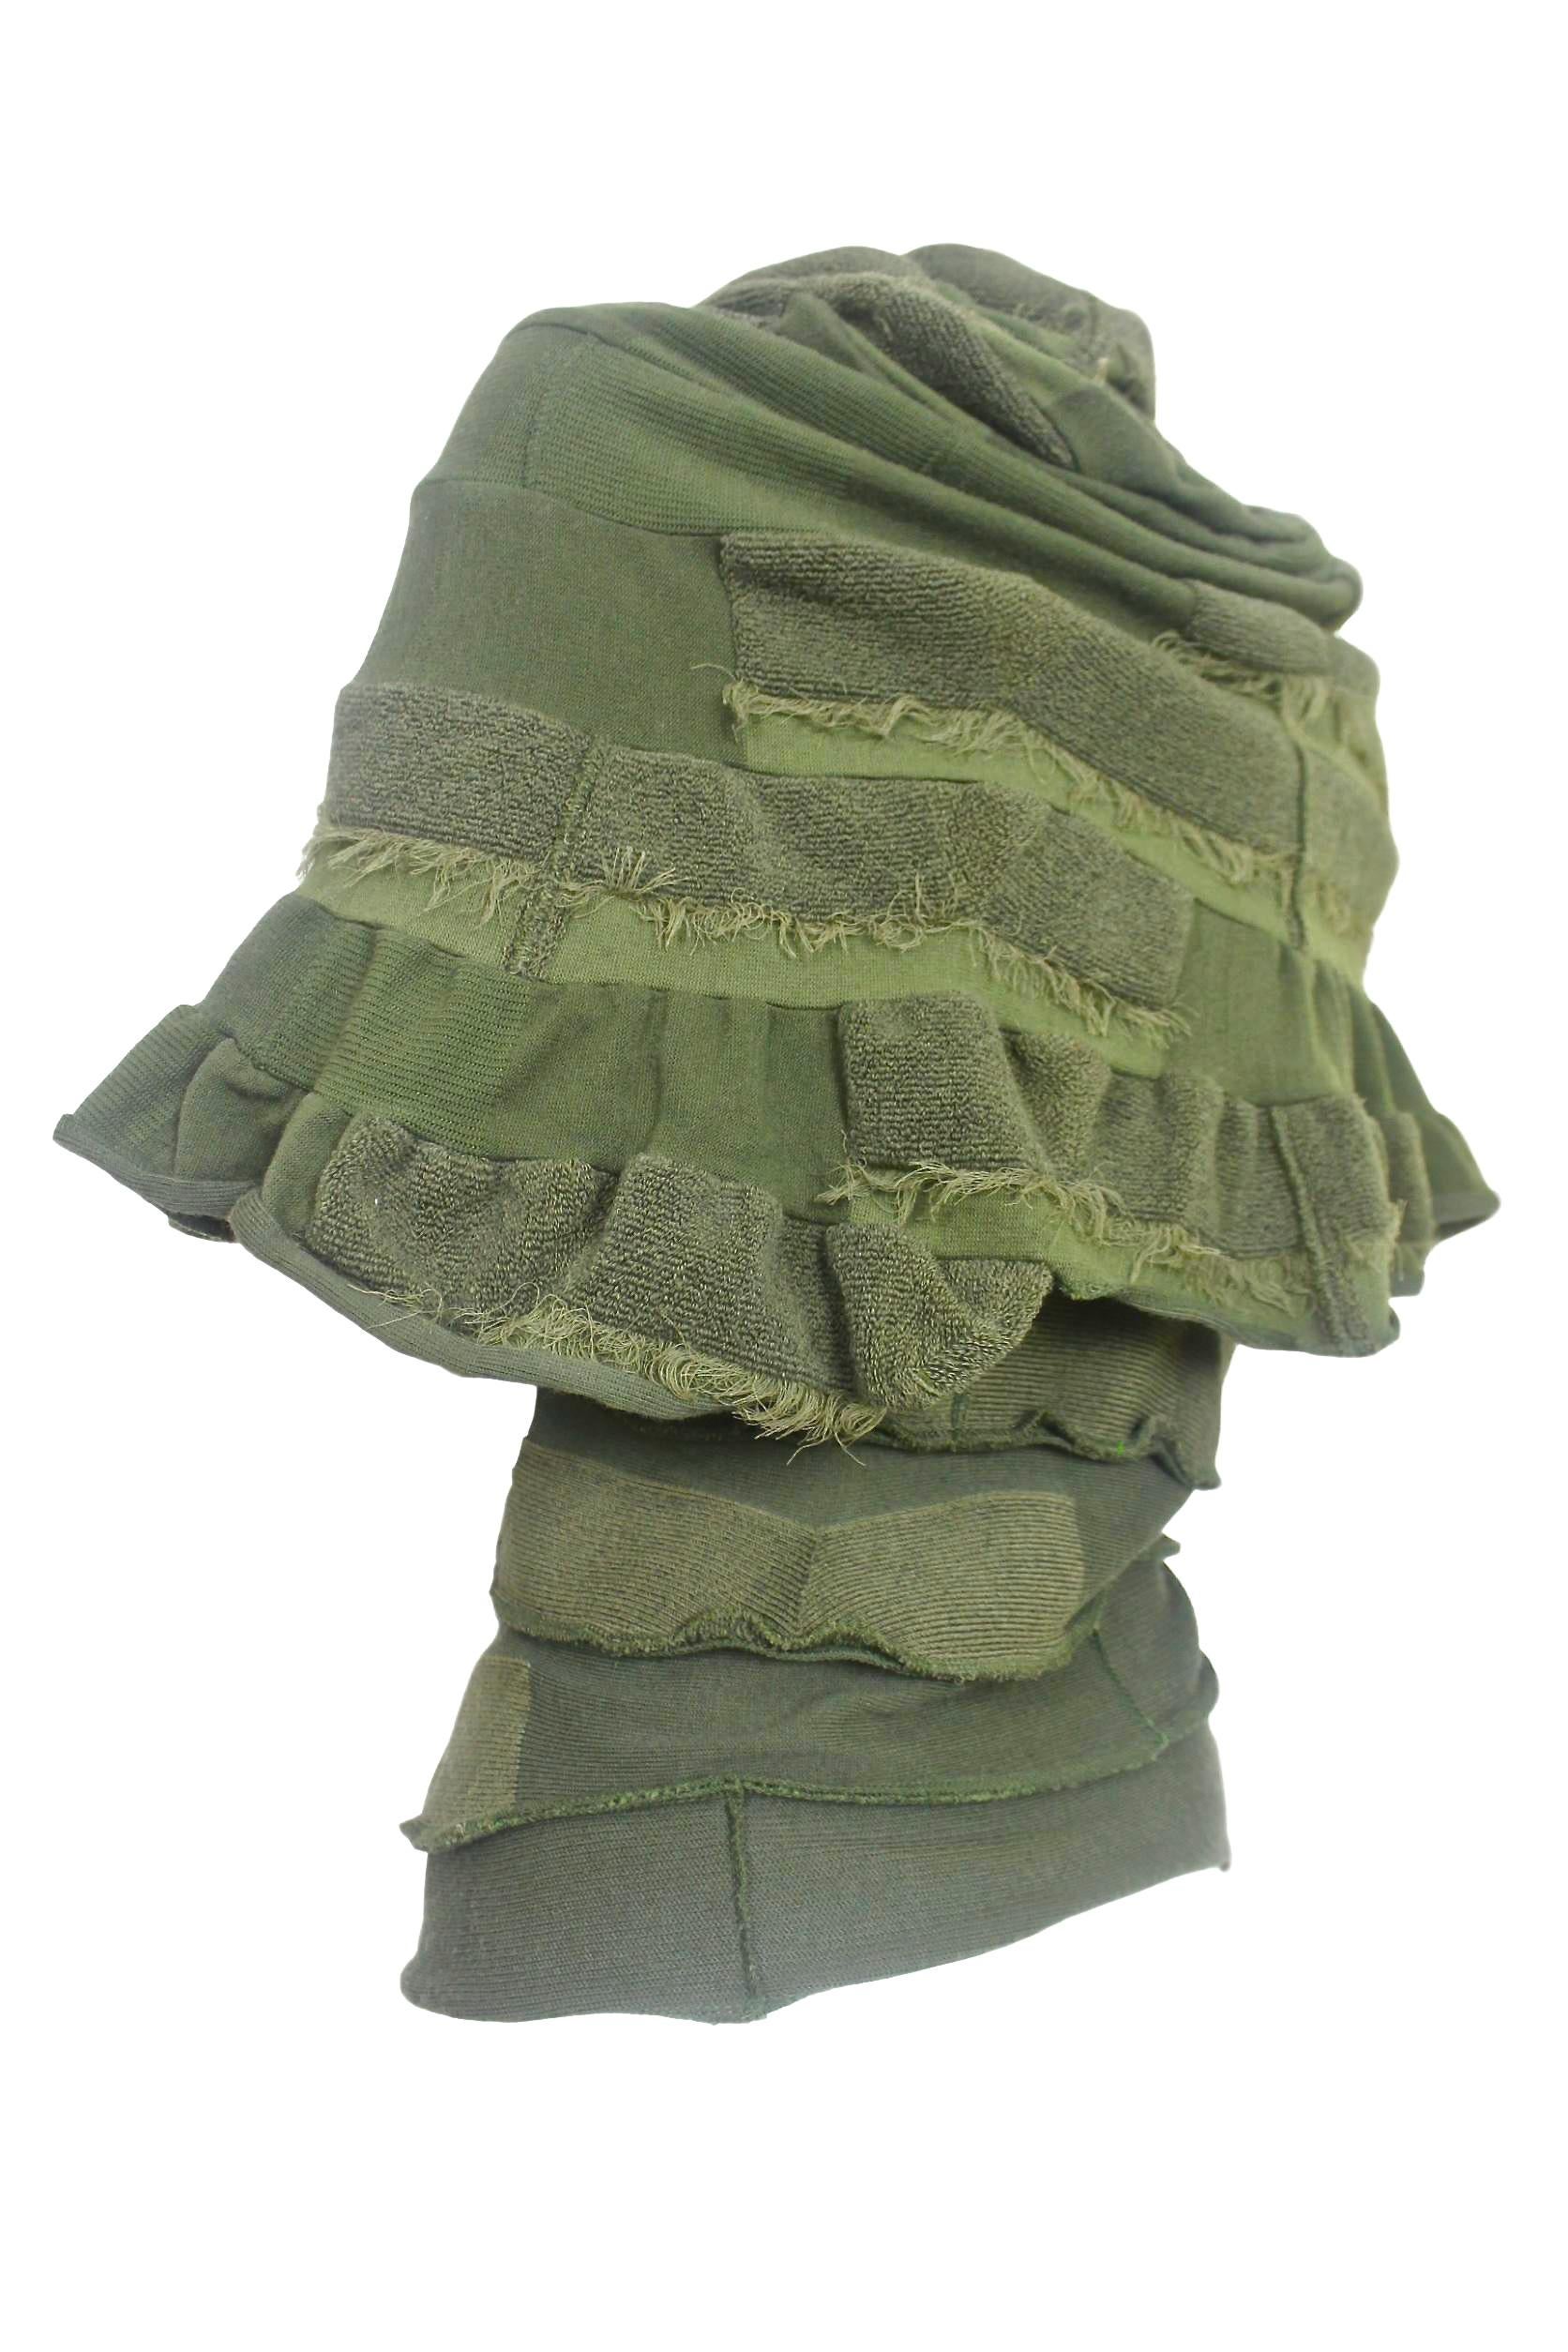 Comme des Garçons Junya Watanabe 2006 Collection Military Knitted Poncho 8